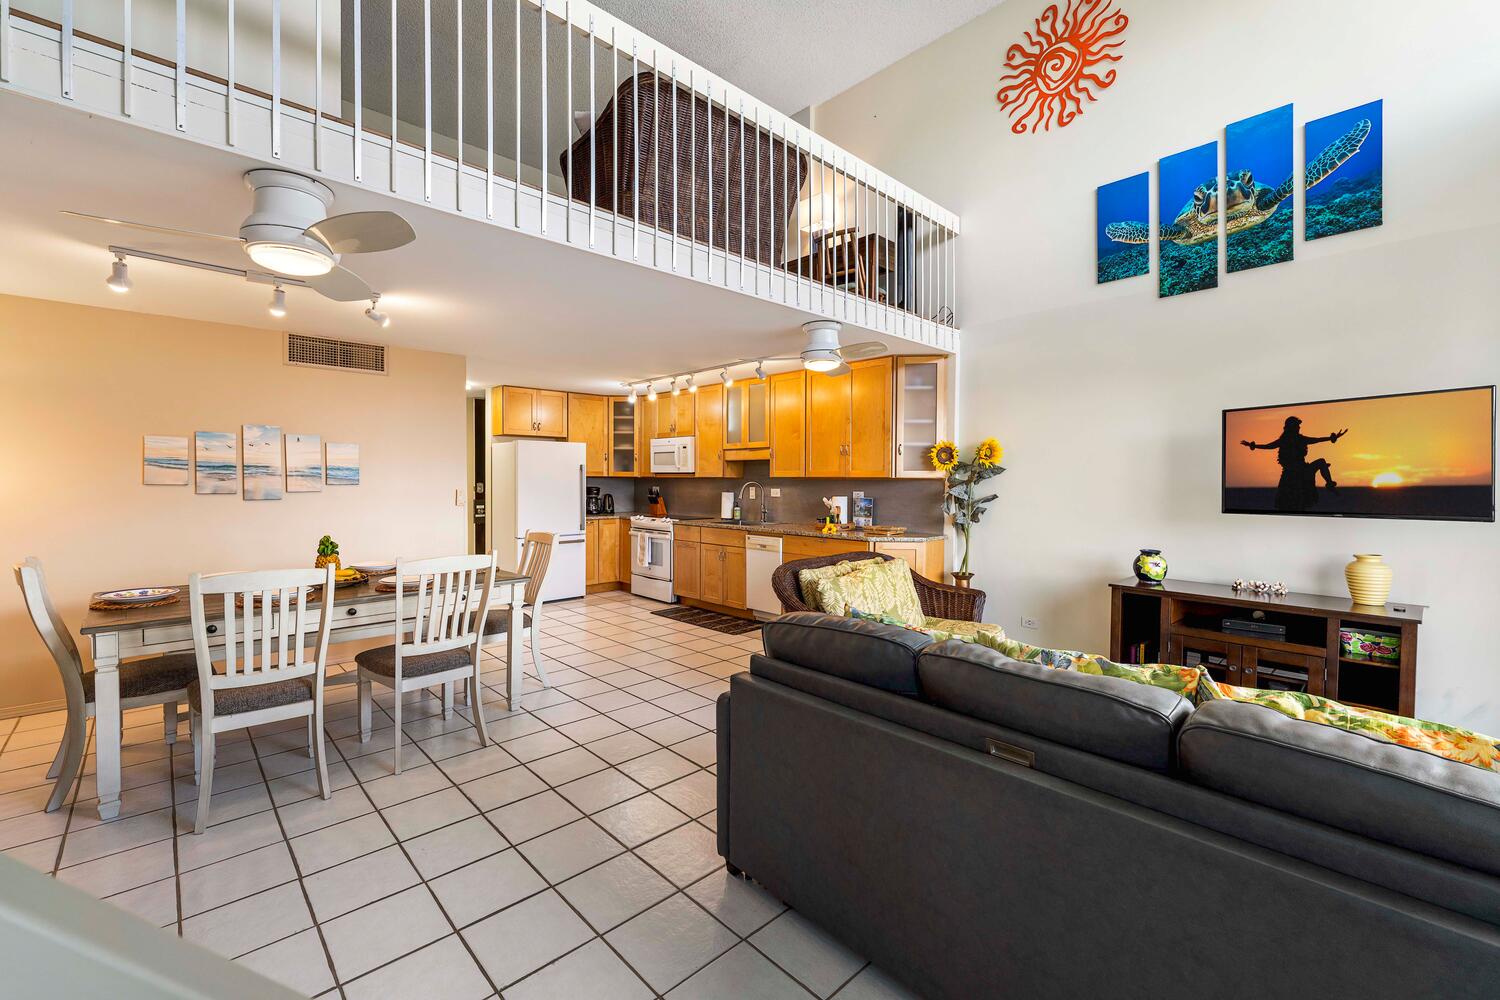 Kailua Kona Vacation Rentals, Kona Alii 512 - Open concept-floorplan for easy flow and shared moments.